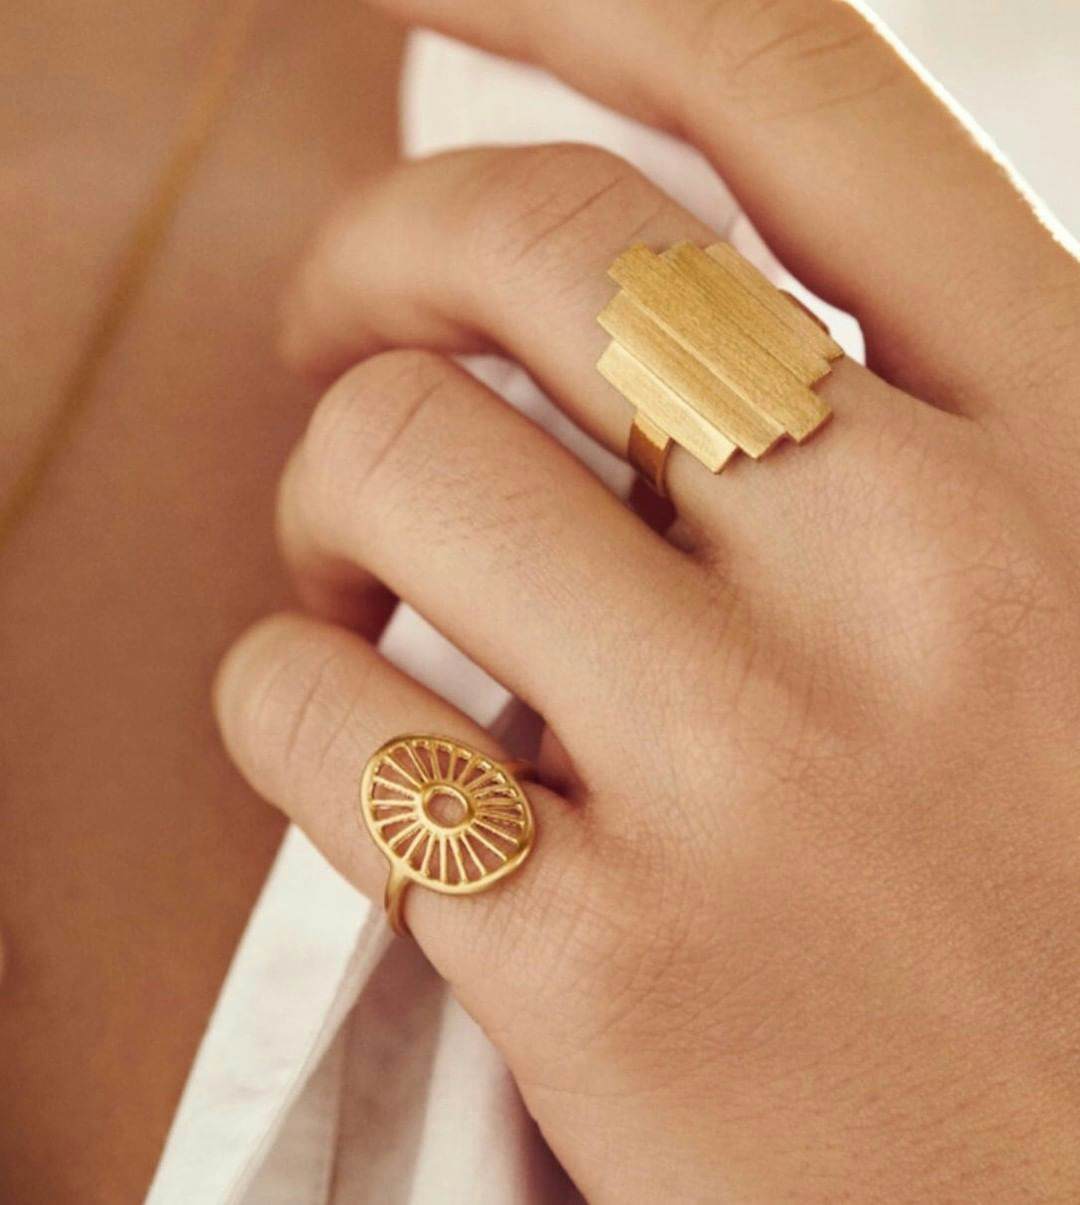 Brick Ring from Pernille Corydon in Goldplated-Silver Sterling 925